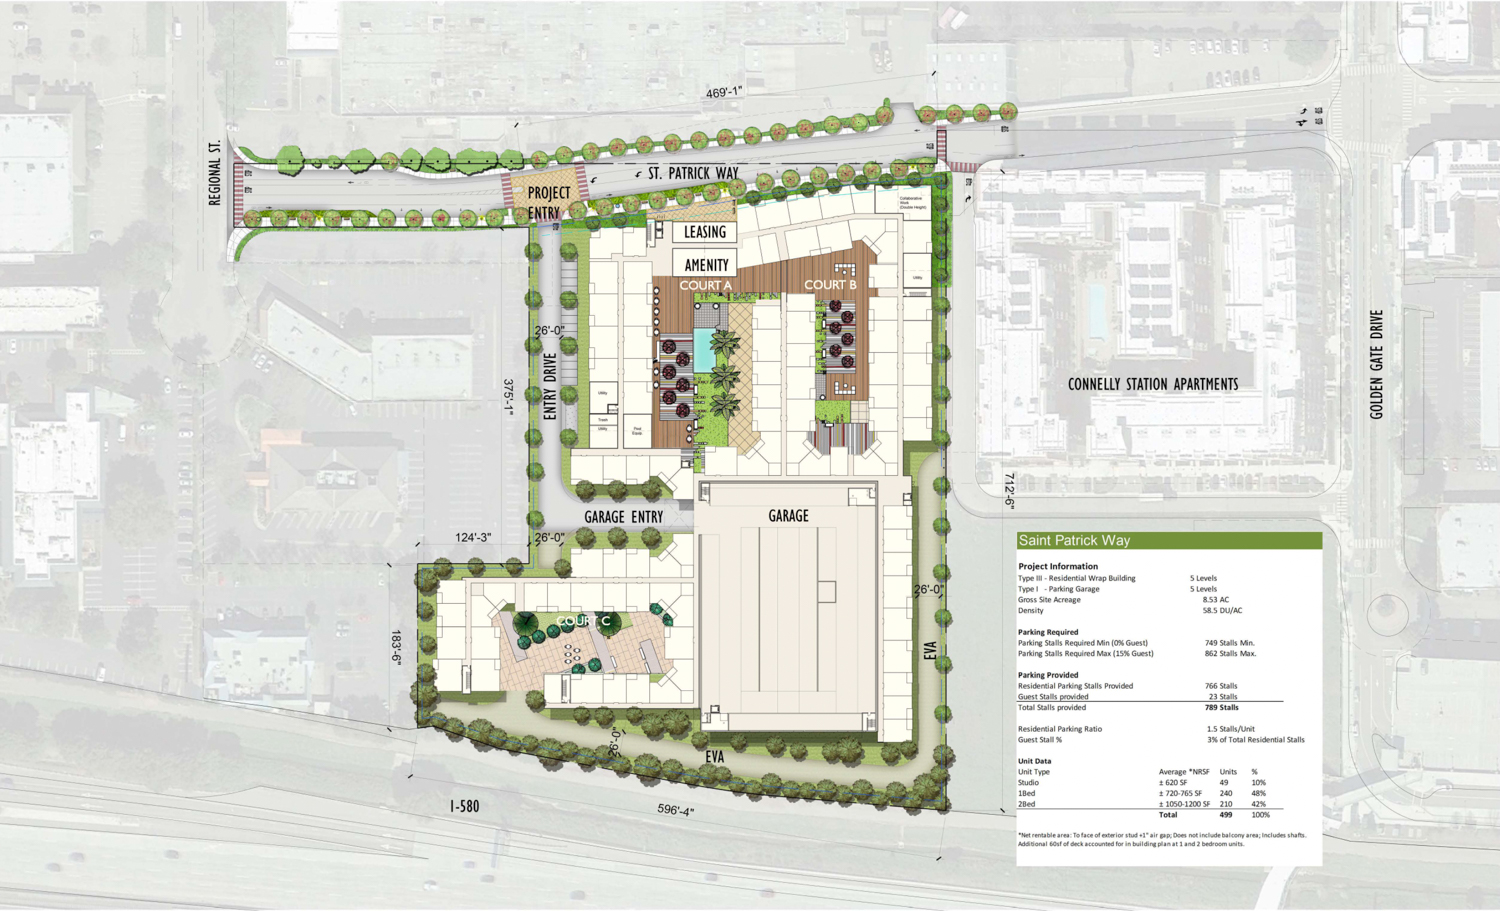 6700 Golden Gate Drive site map with landscaping, illustration by KTGY Architects